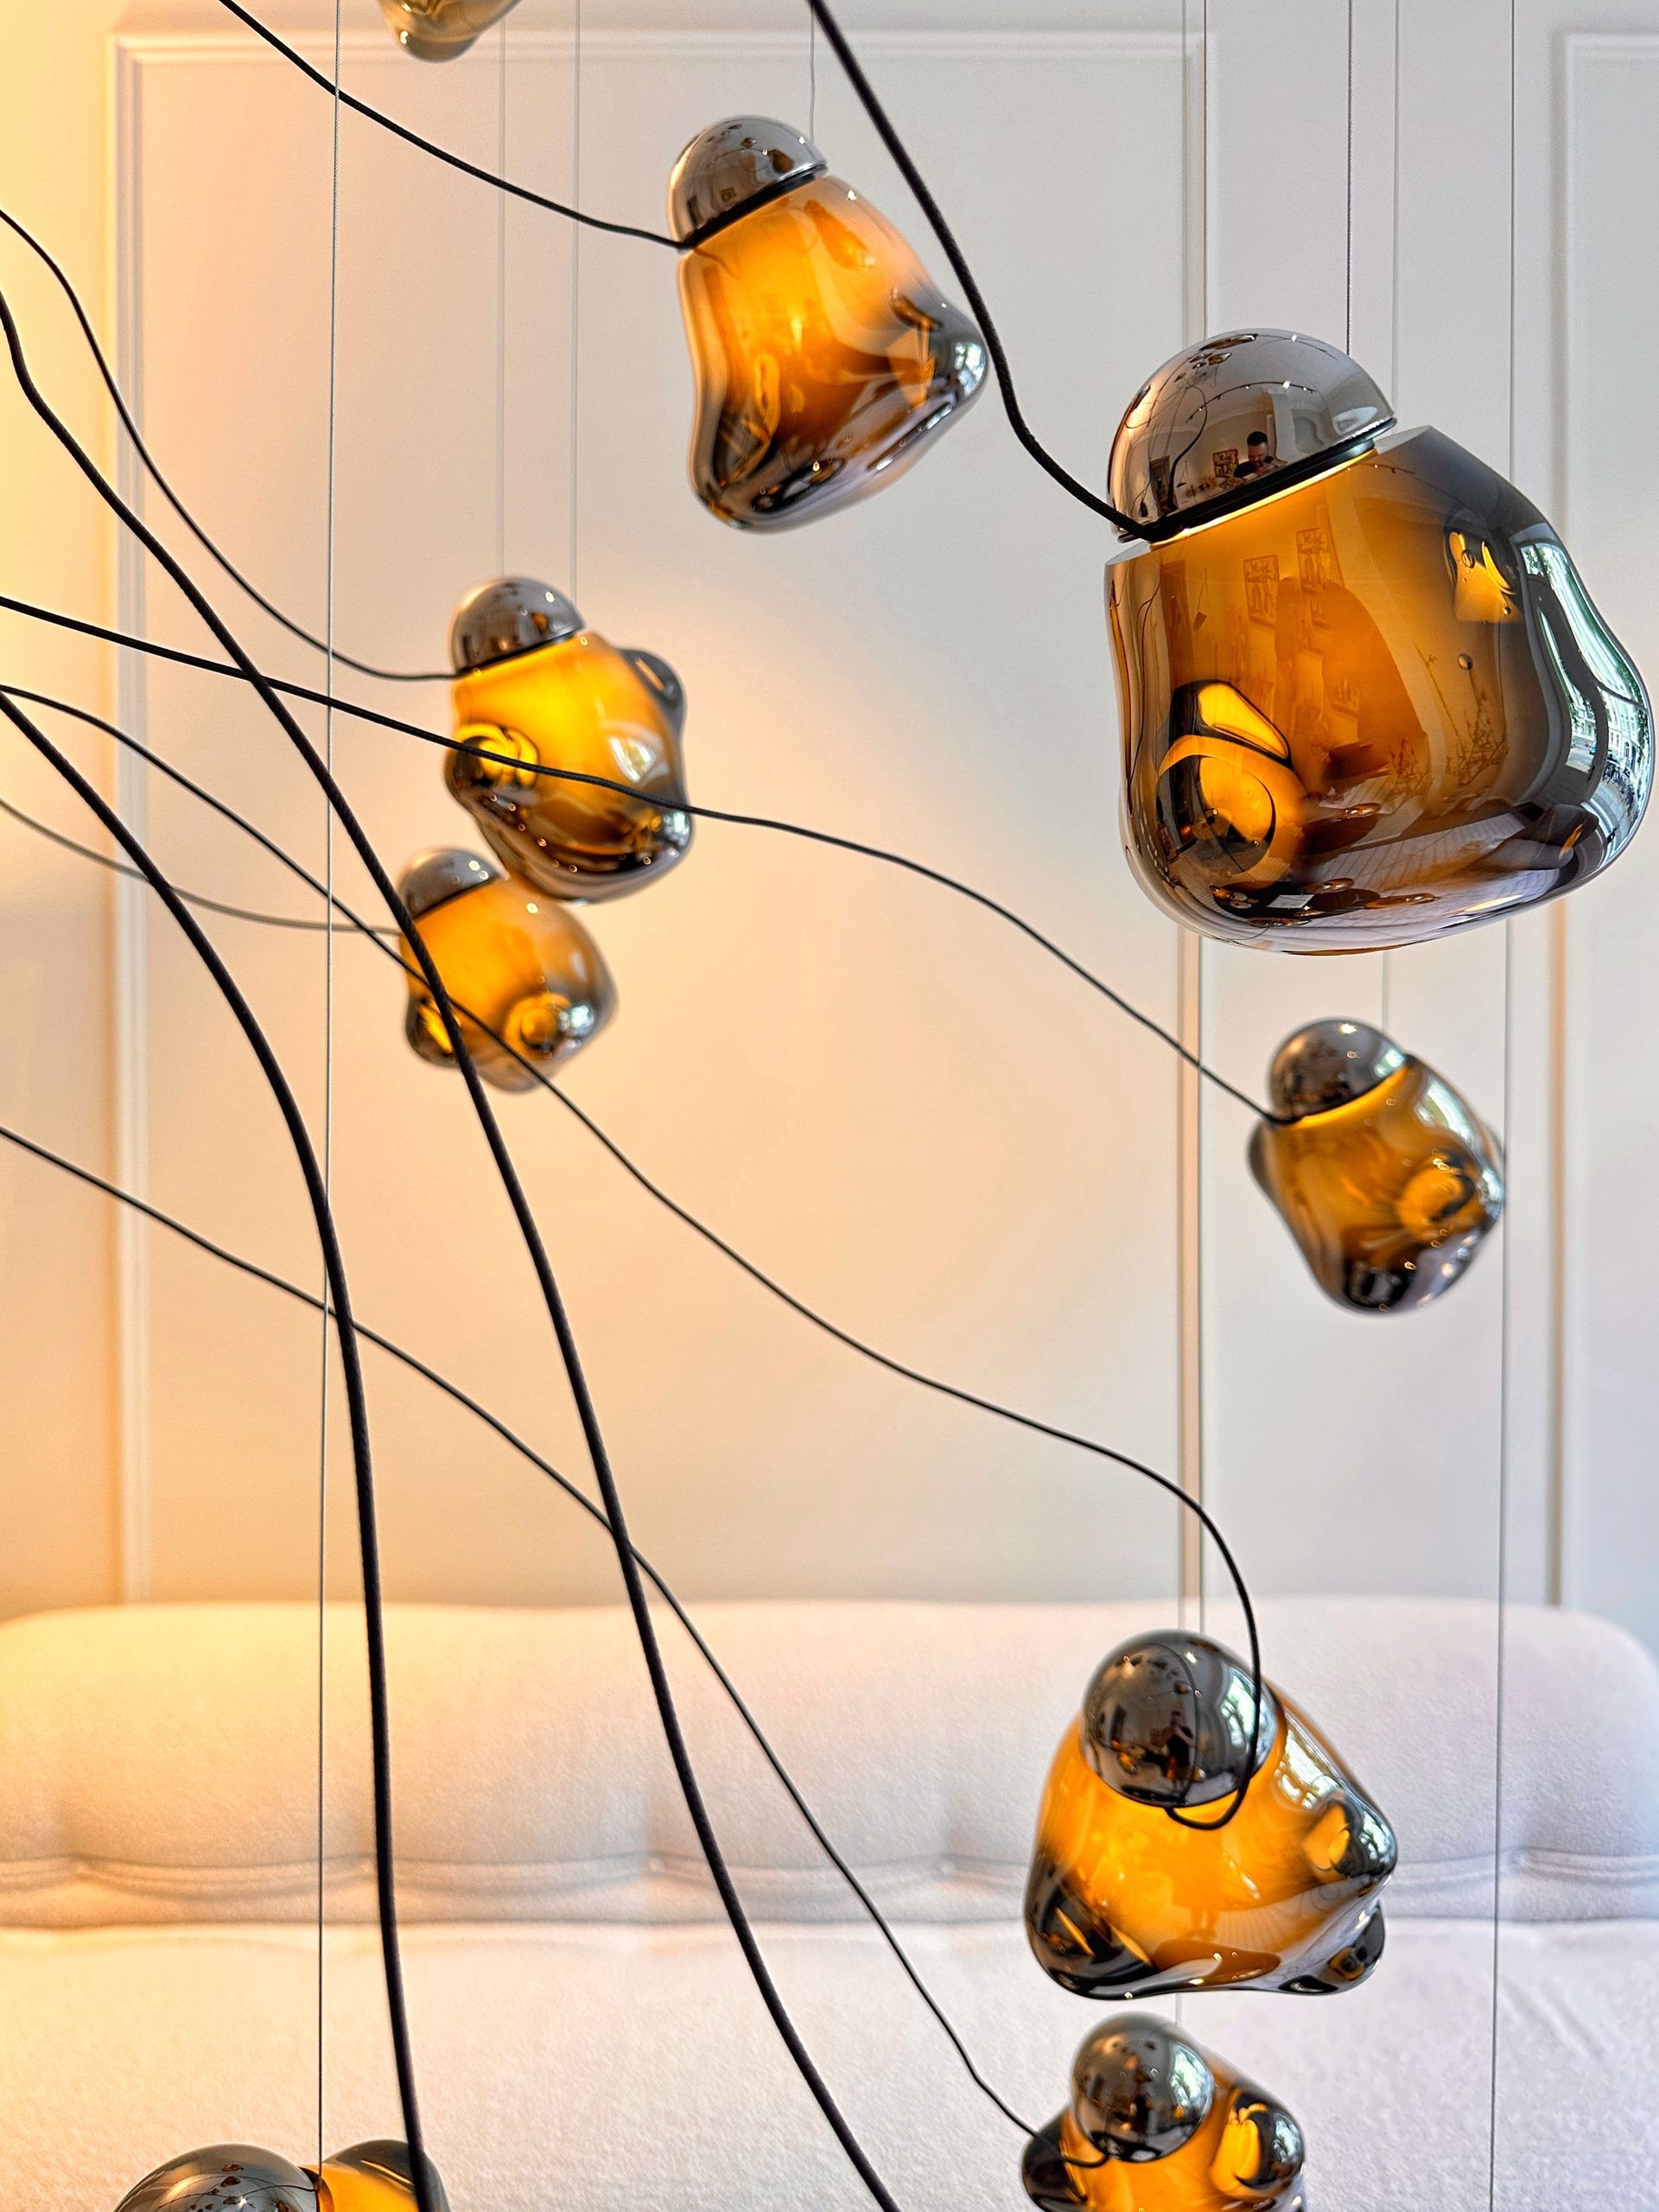 image showing a luxury light sculpture from Bocci